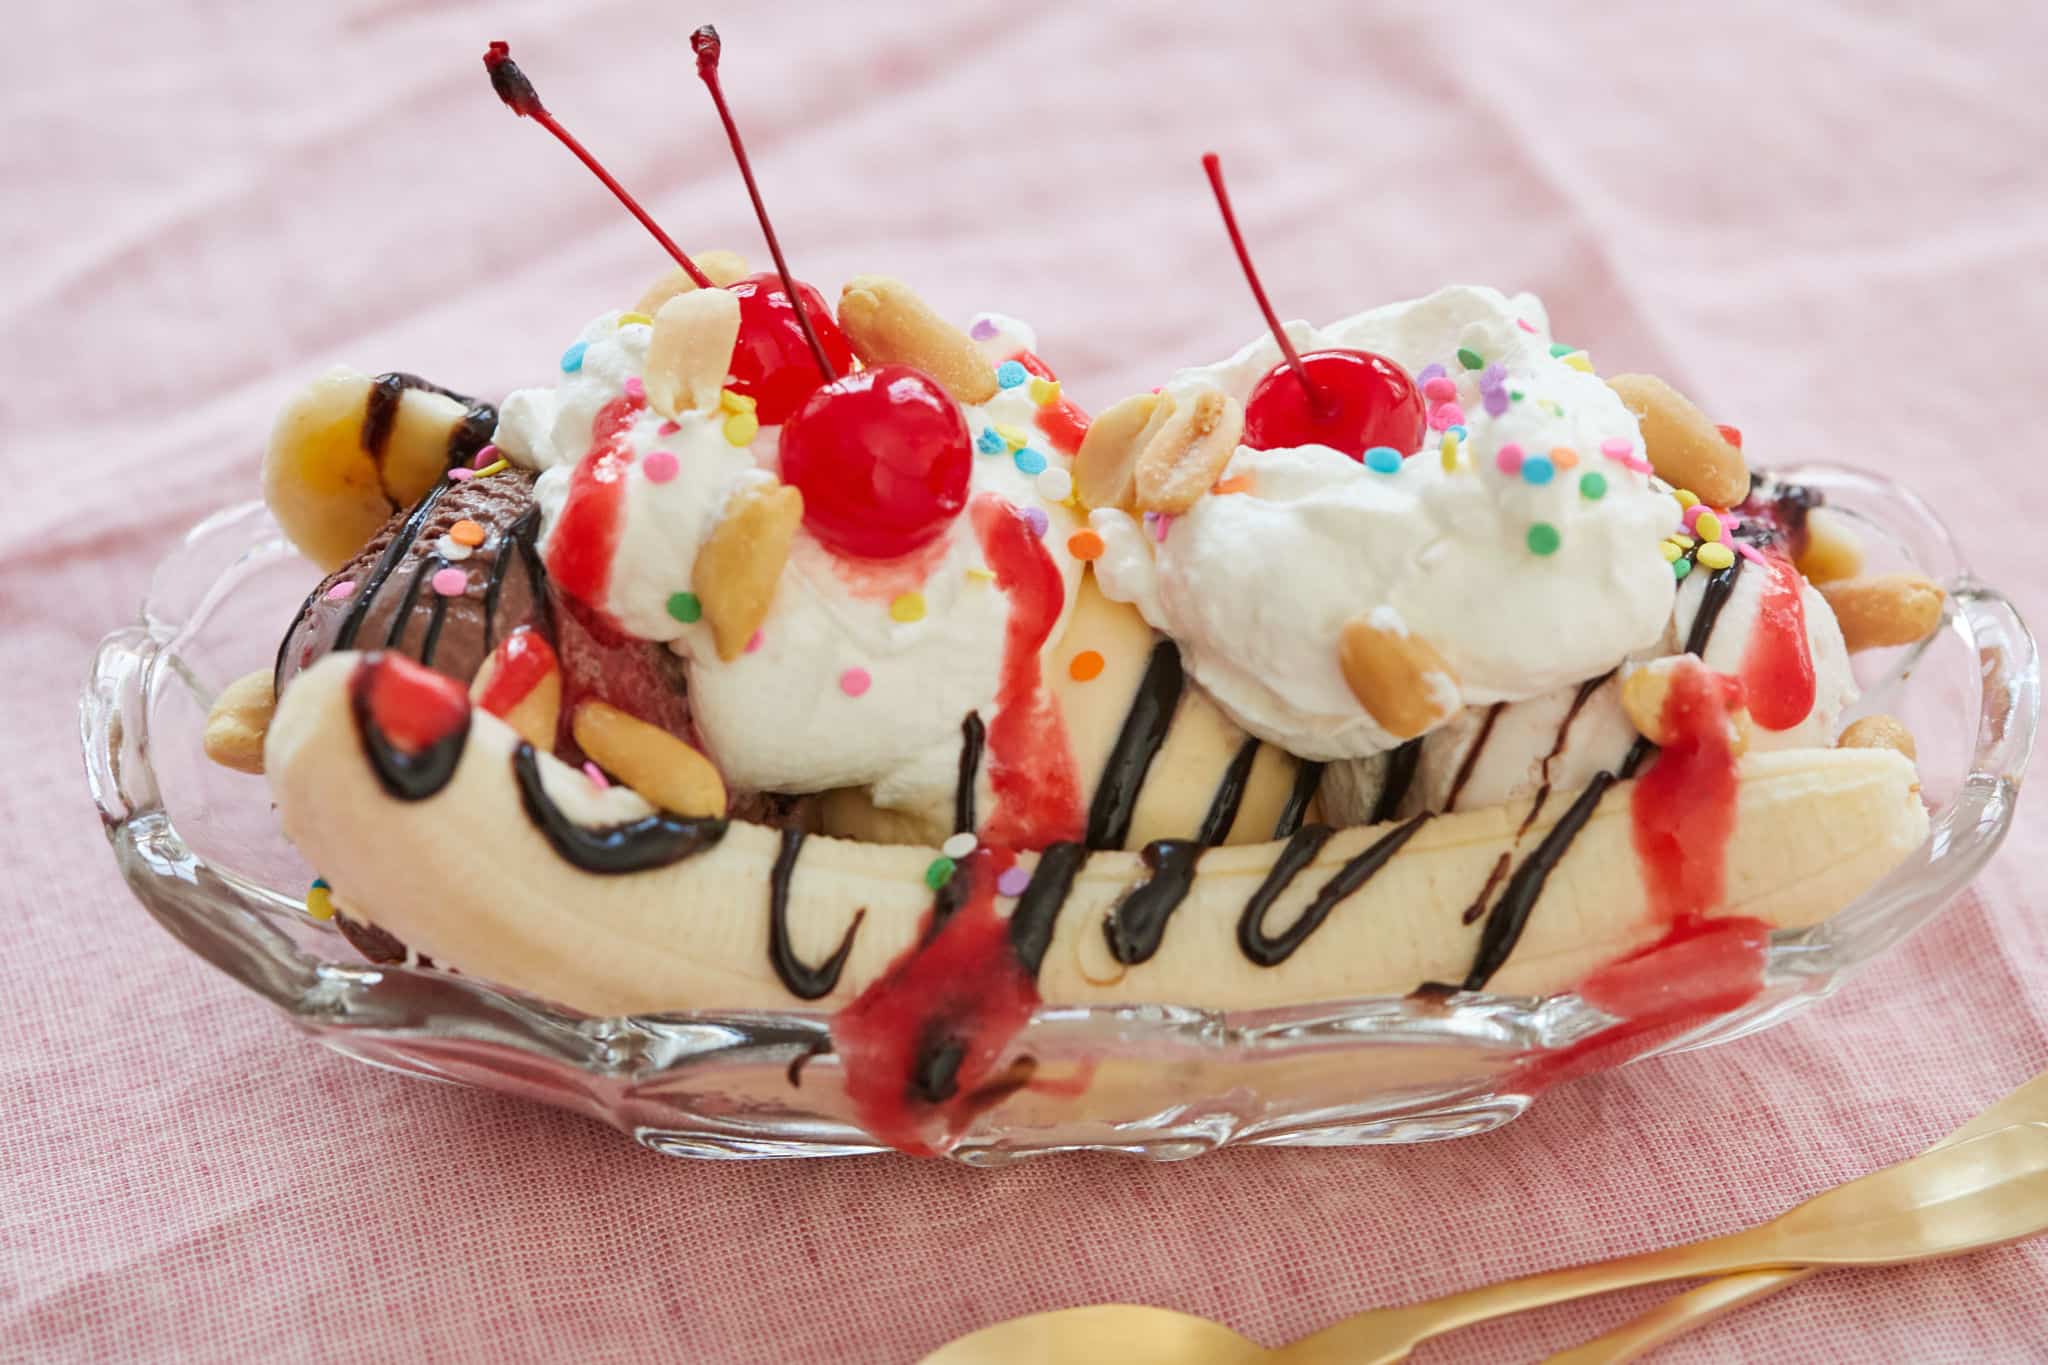 A classic banana split with toppings.